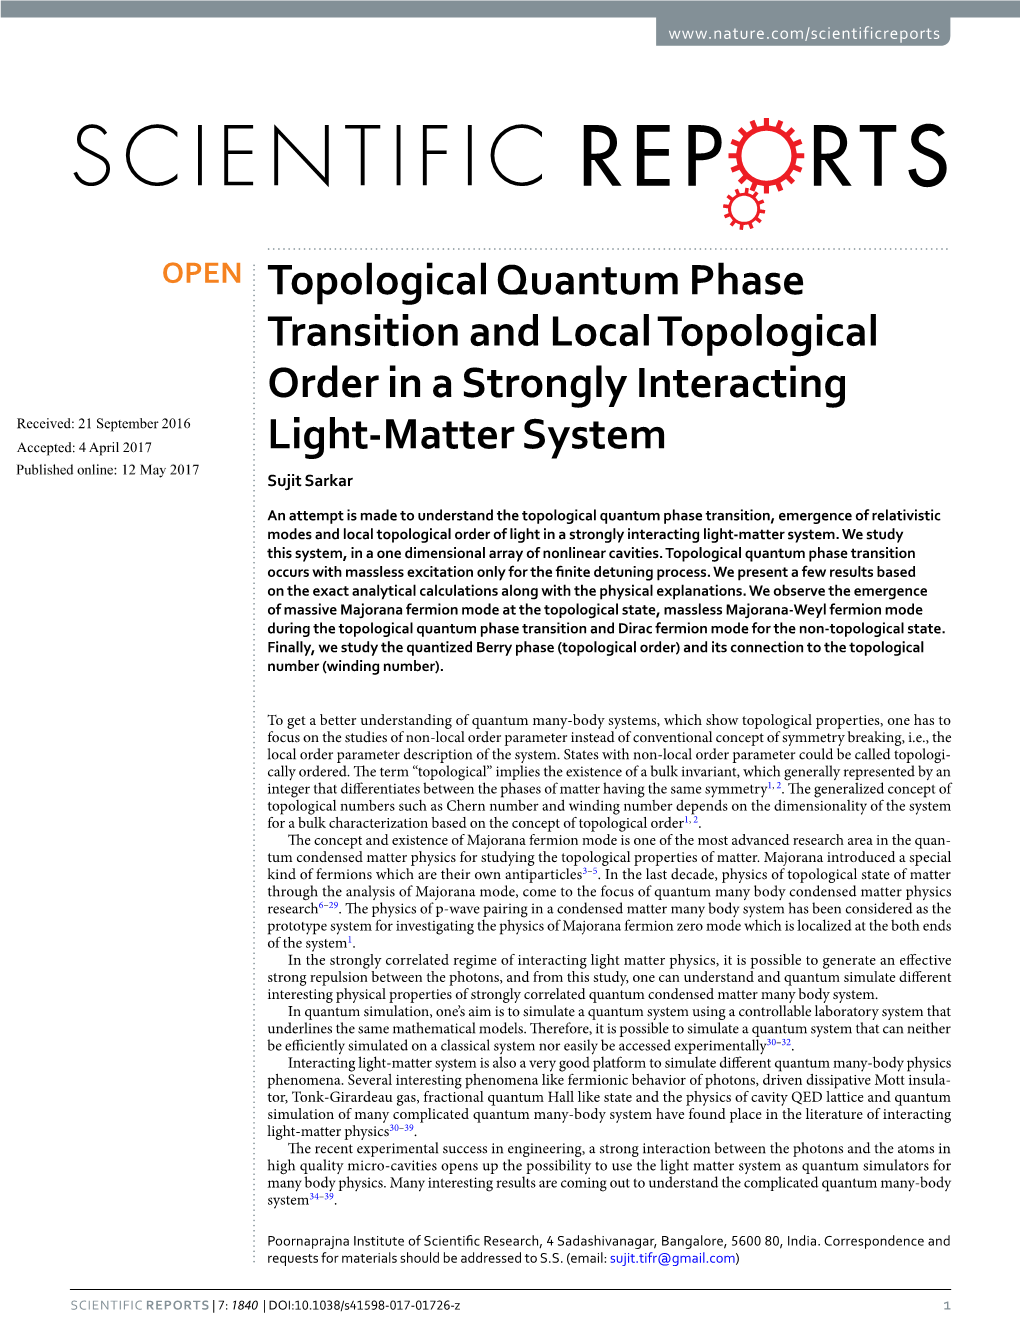 Topological Quantum Phase Transition and Local Topological